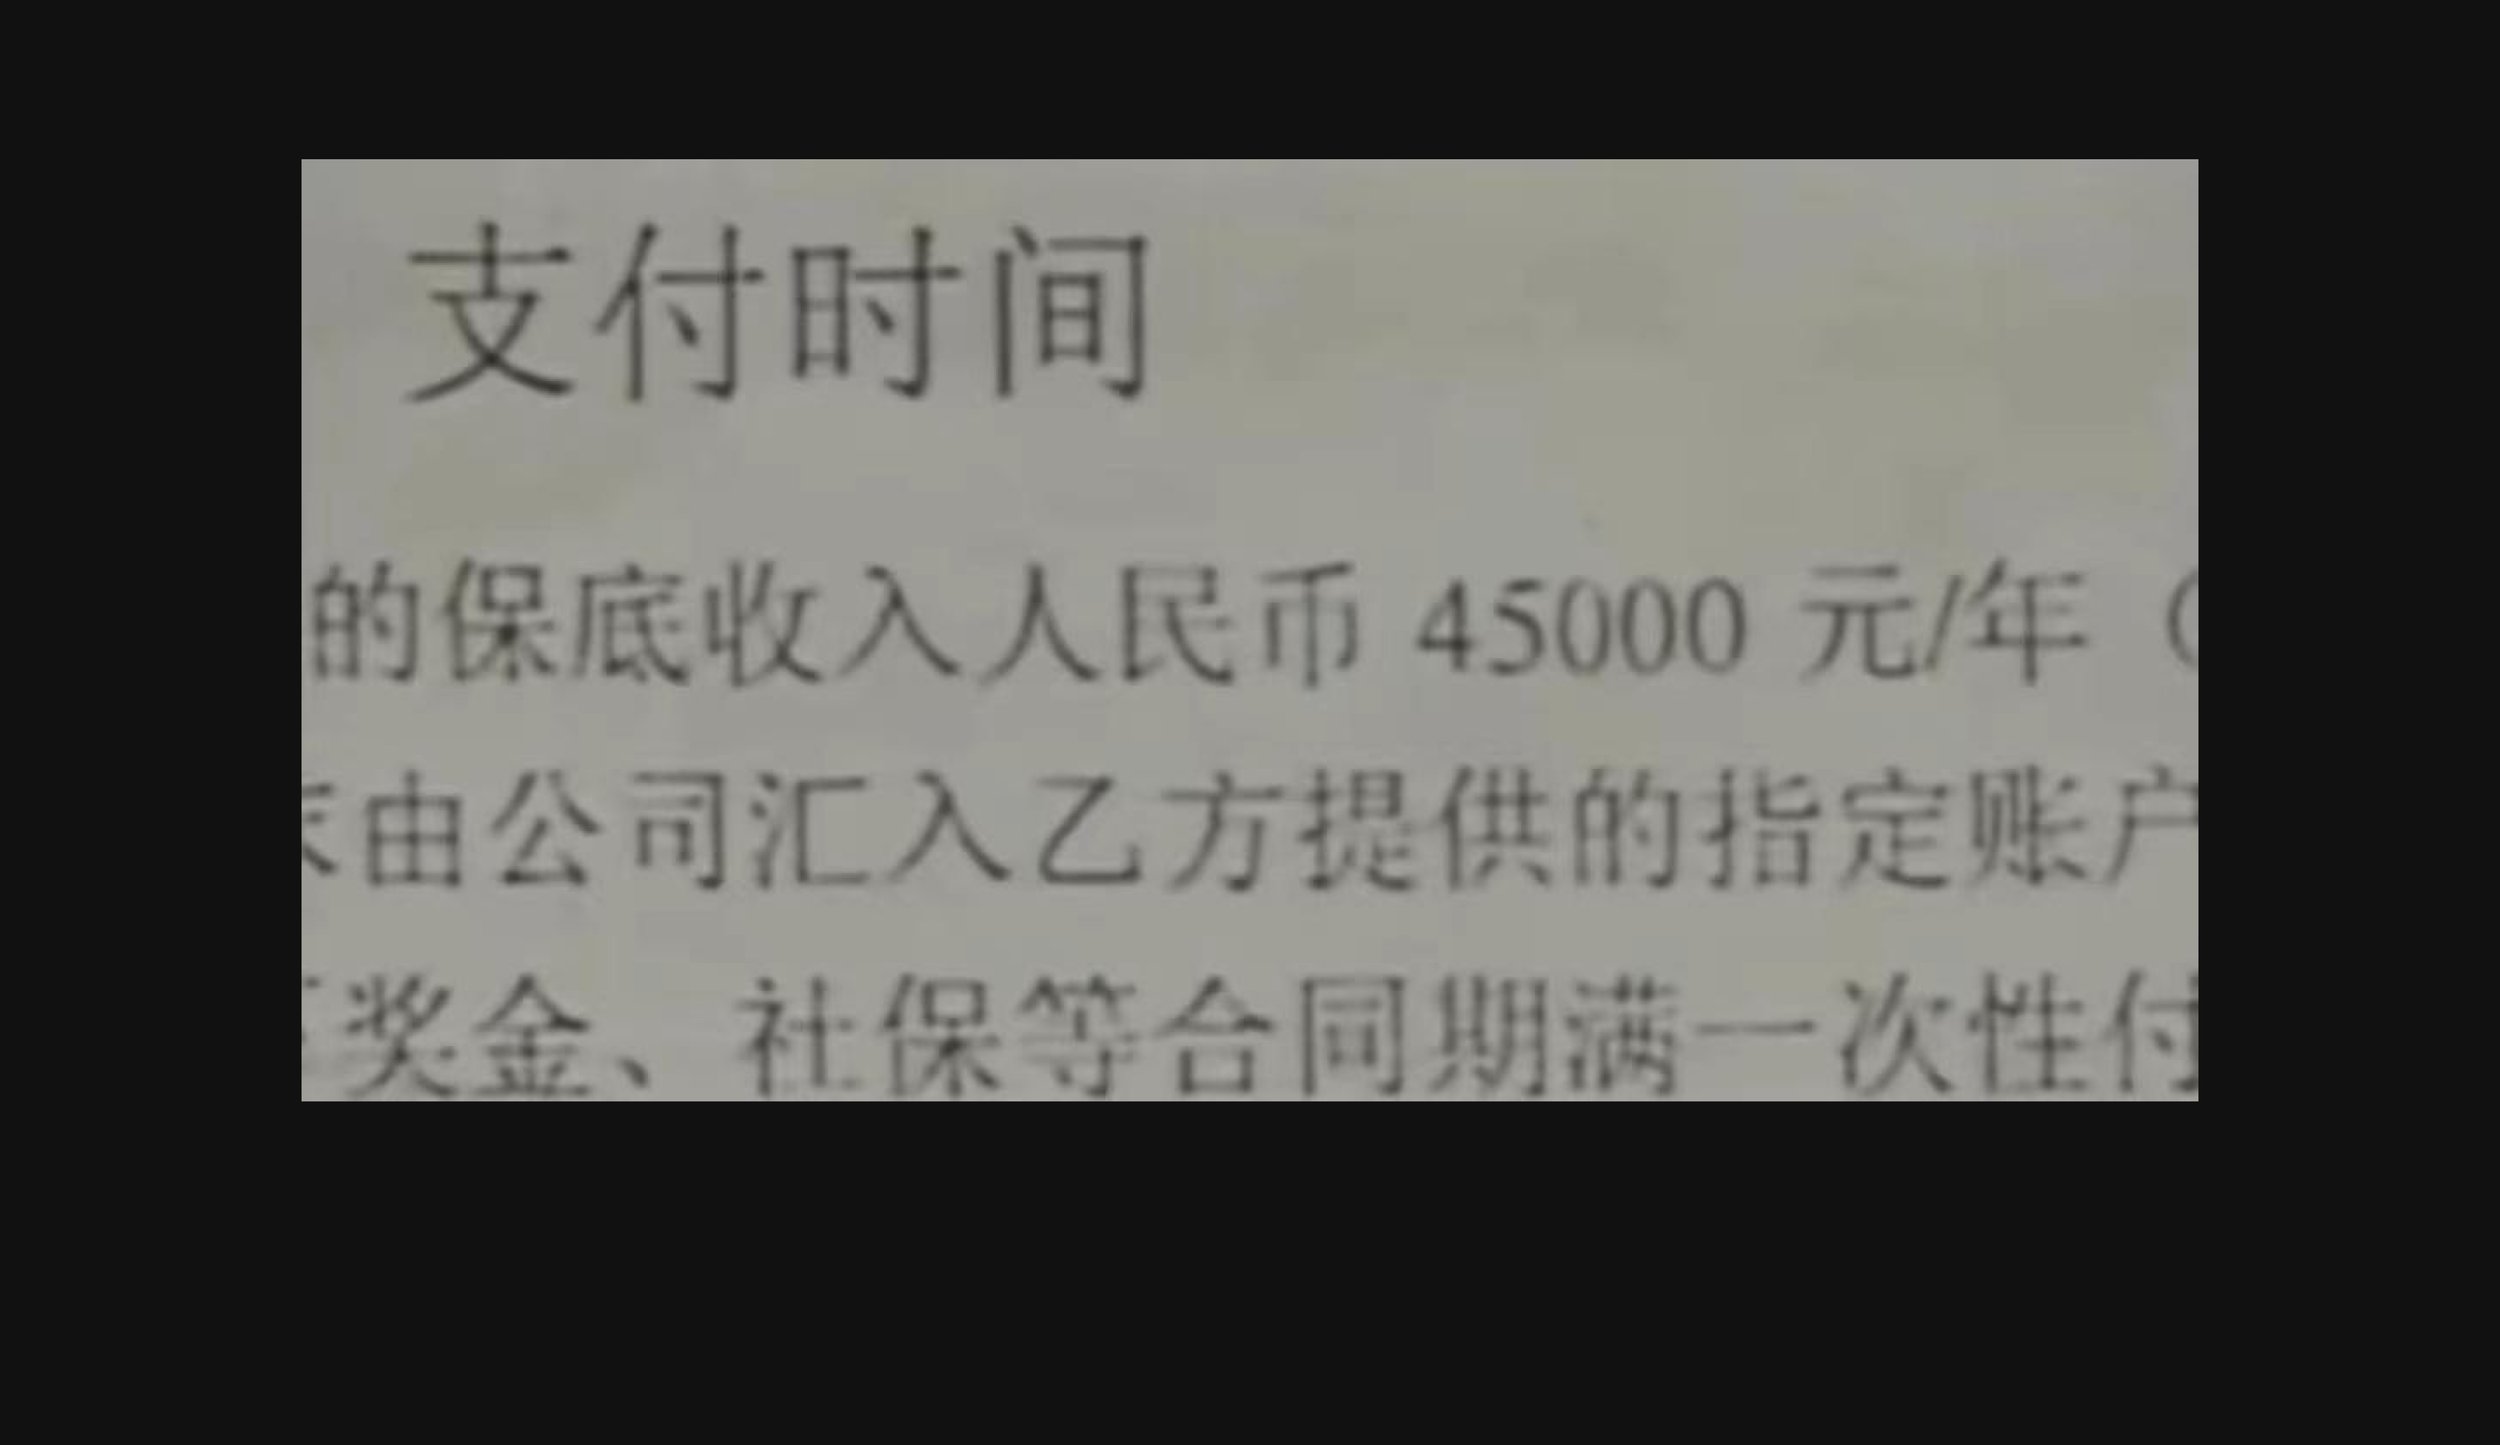  Captain Li said that according to the contract, they would only receive 45,000 yuan if they didn't catch a single squid on this trip. If they did, they would no be entitled to the 45,000 yuan, and their salaries were calculated based on a monthly sa